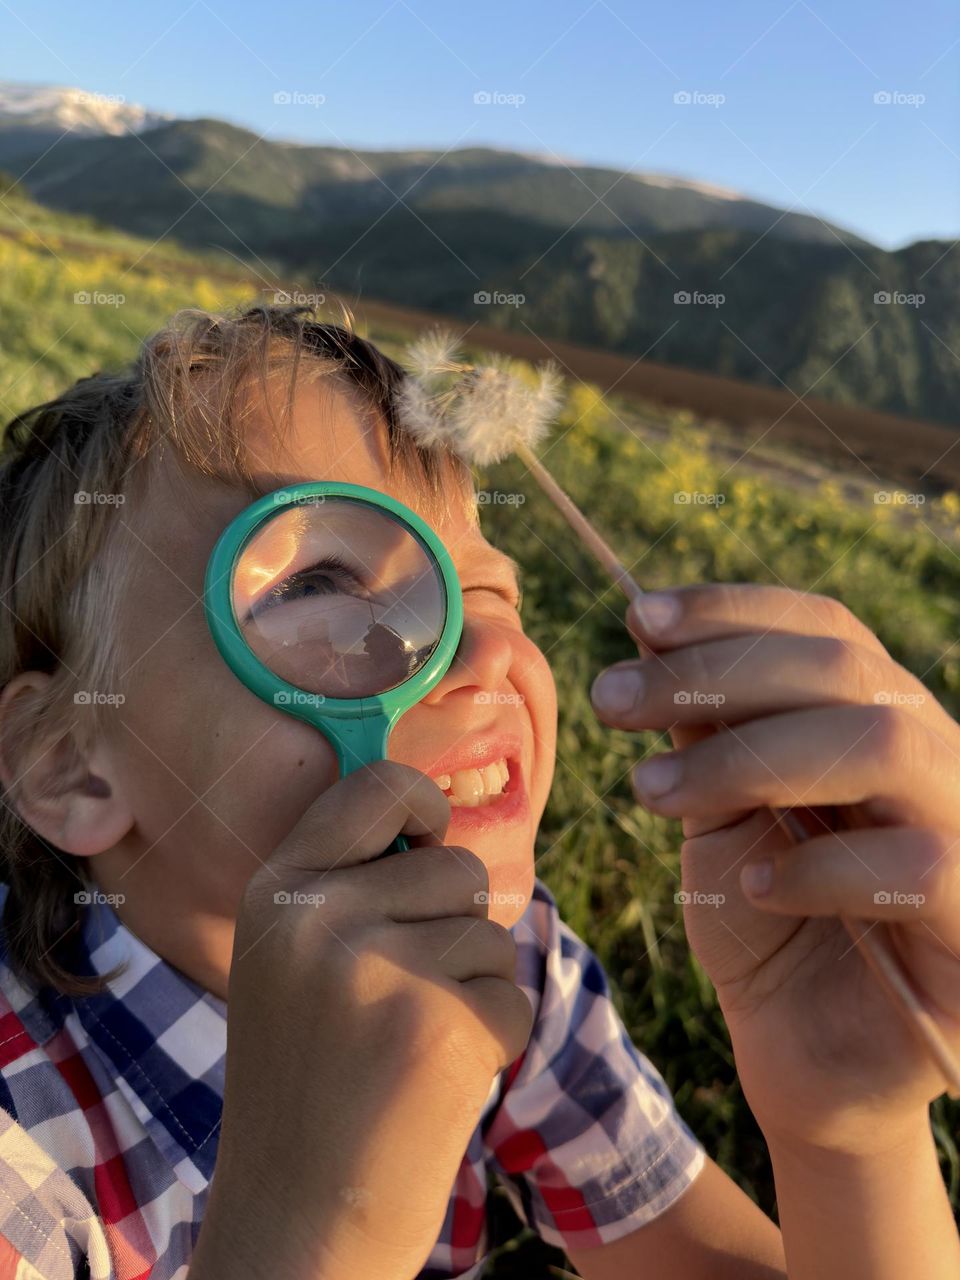 boy looking through a magnifying glass at a flower